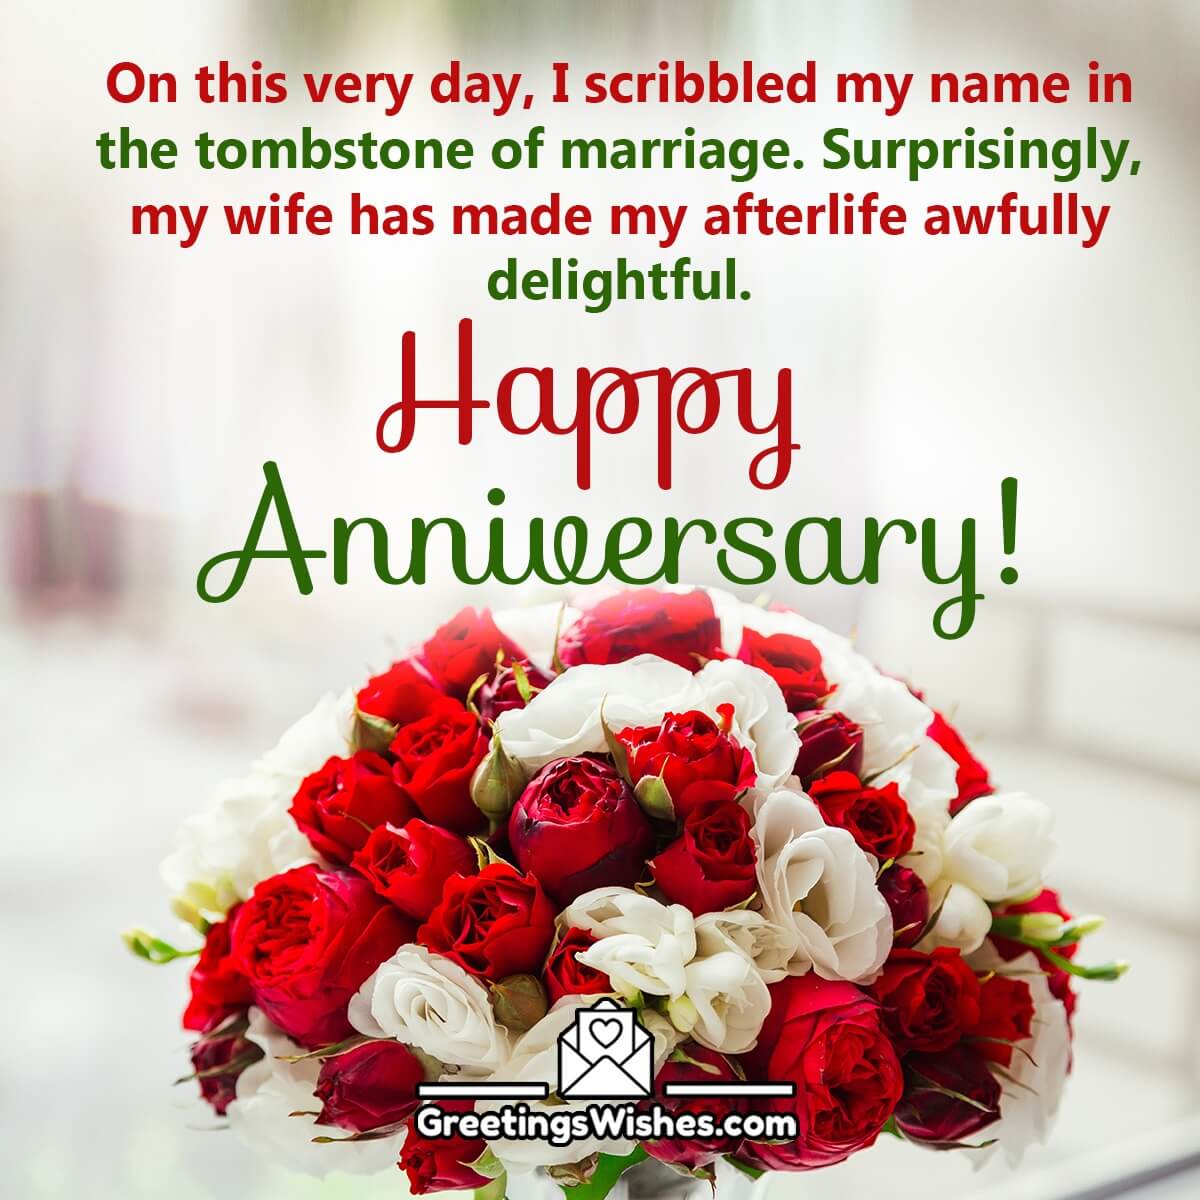 Happy Anniversary Wish For Wife